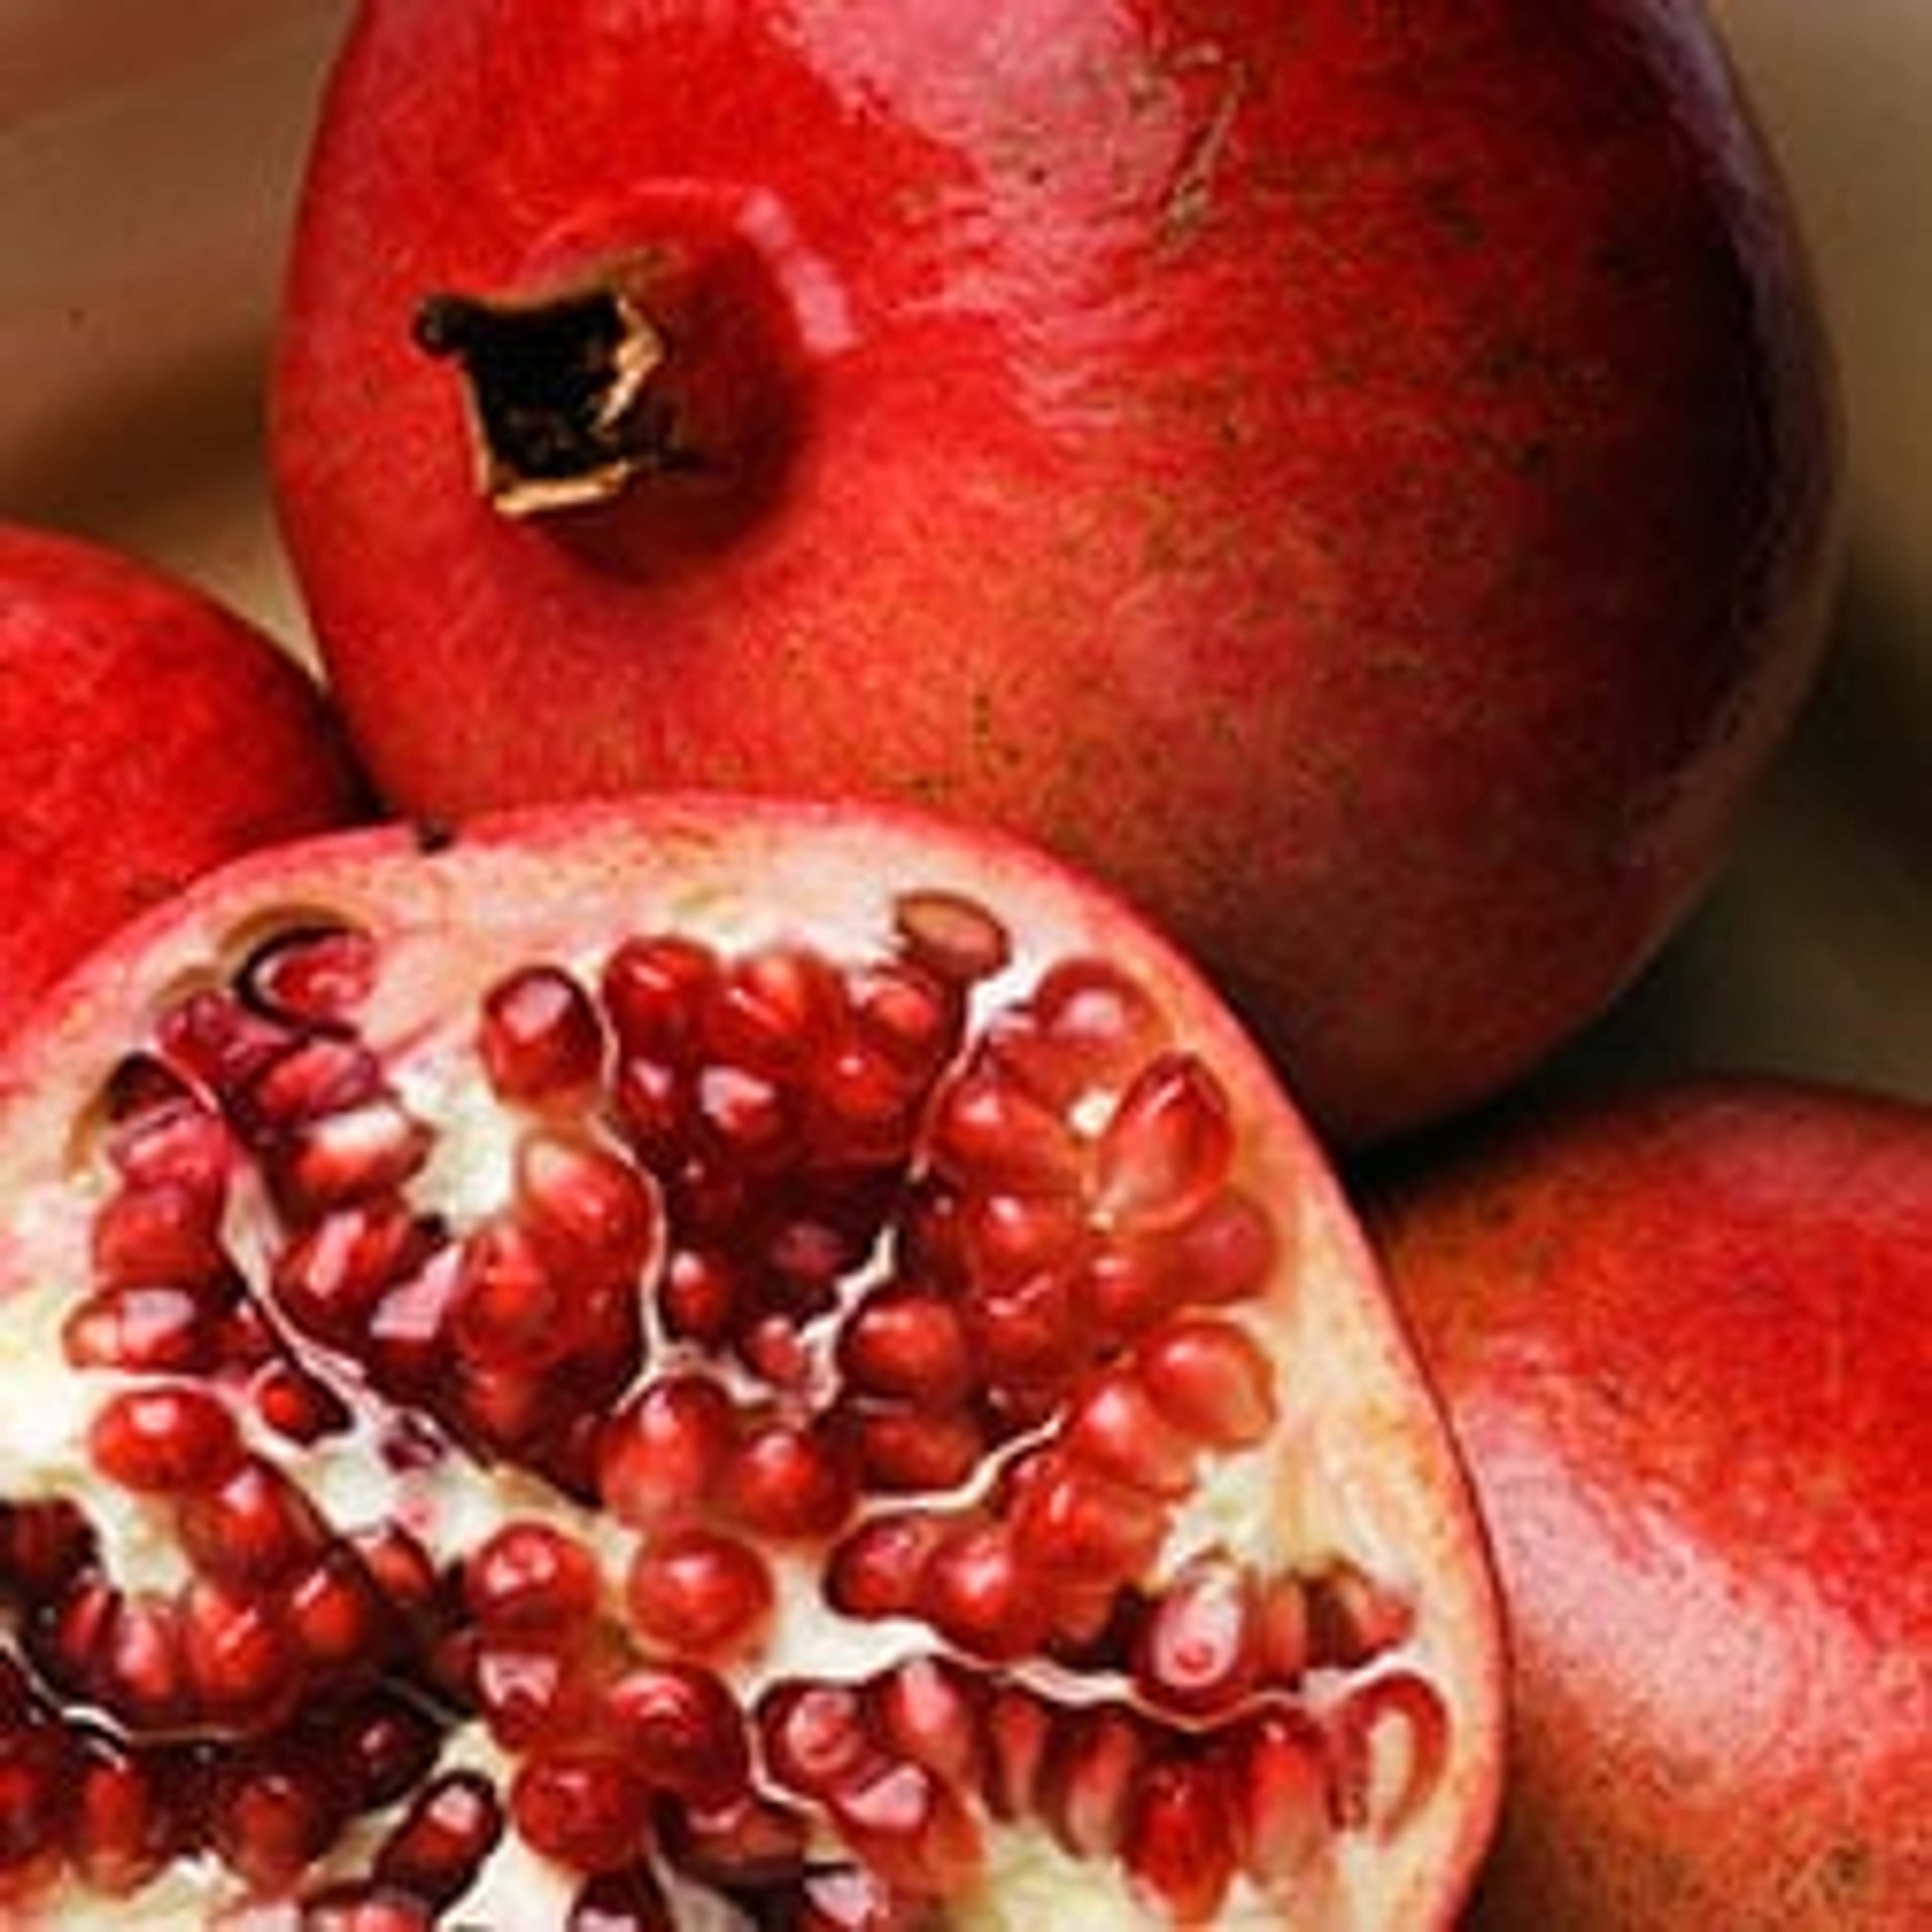 High-quality pomegranate capsules have a high content of punicalagins, its crucial active ingredient.